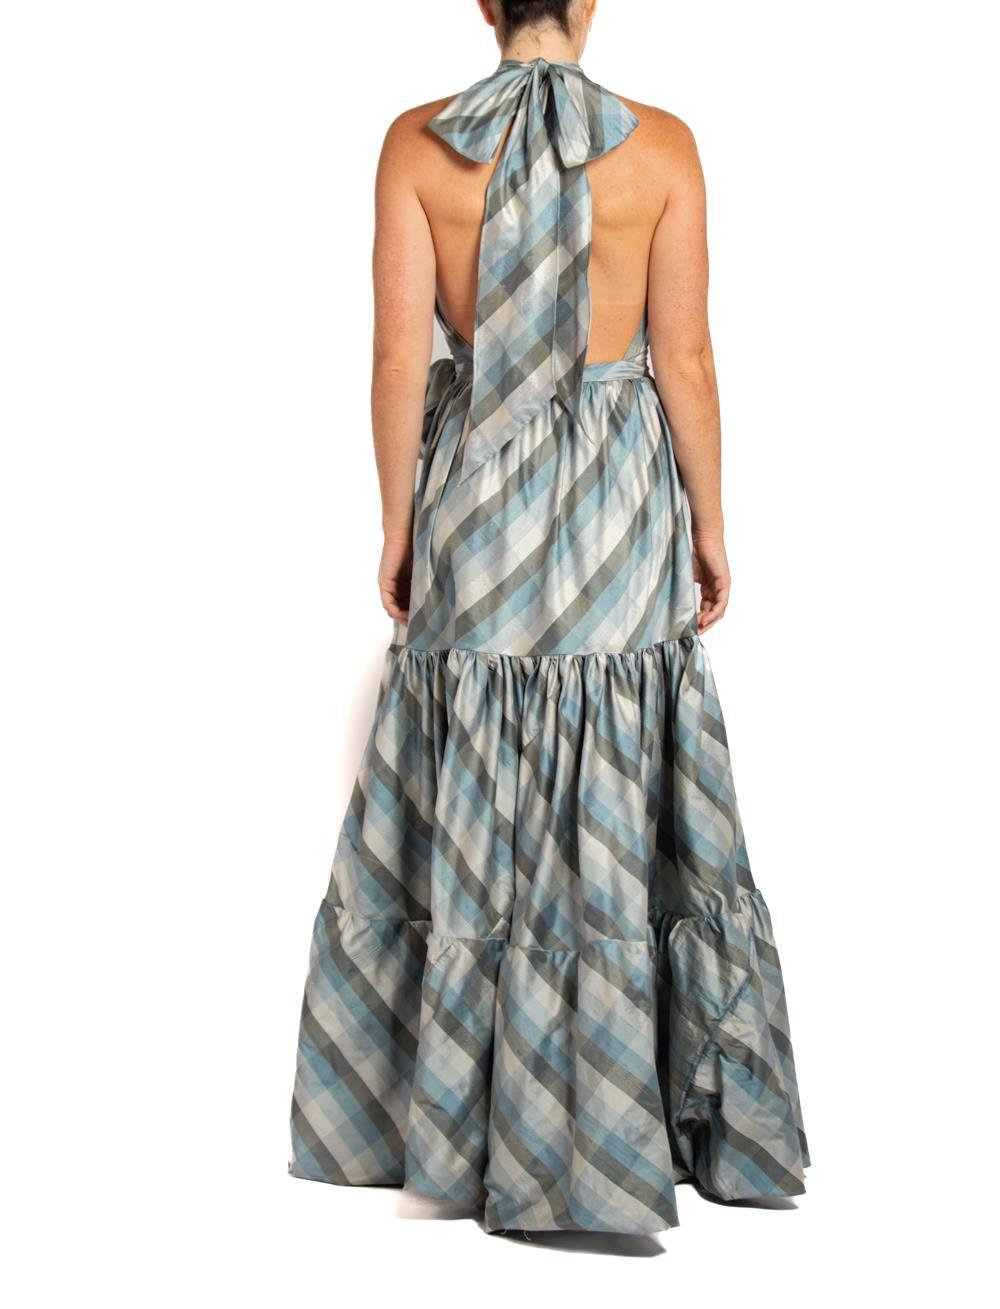 MORPHEW COLLECTION Blue & Gray Silk Taffeta Plaid Gown For Sale 2